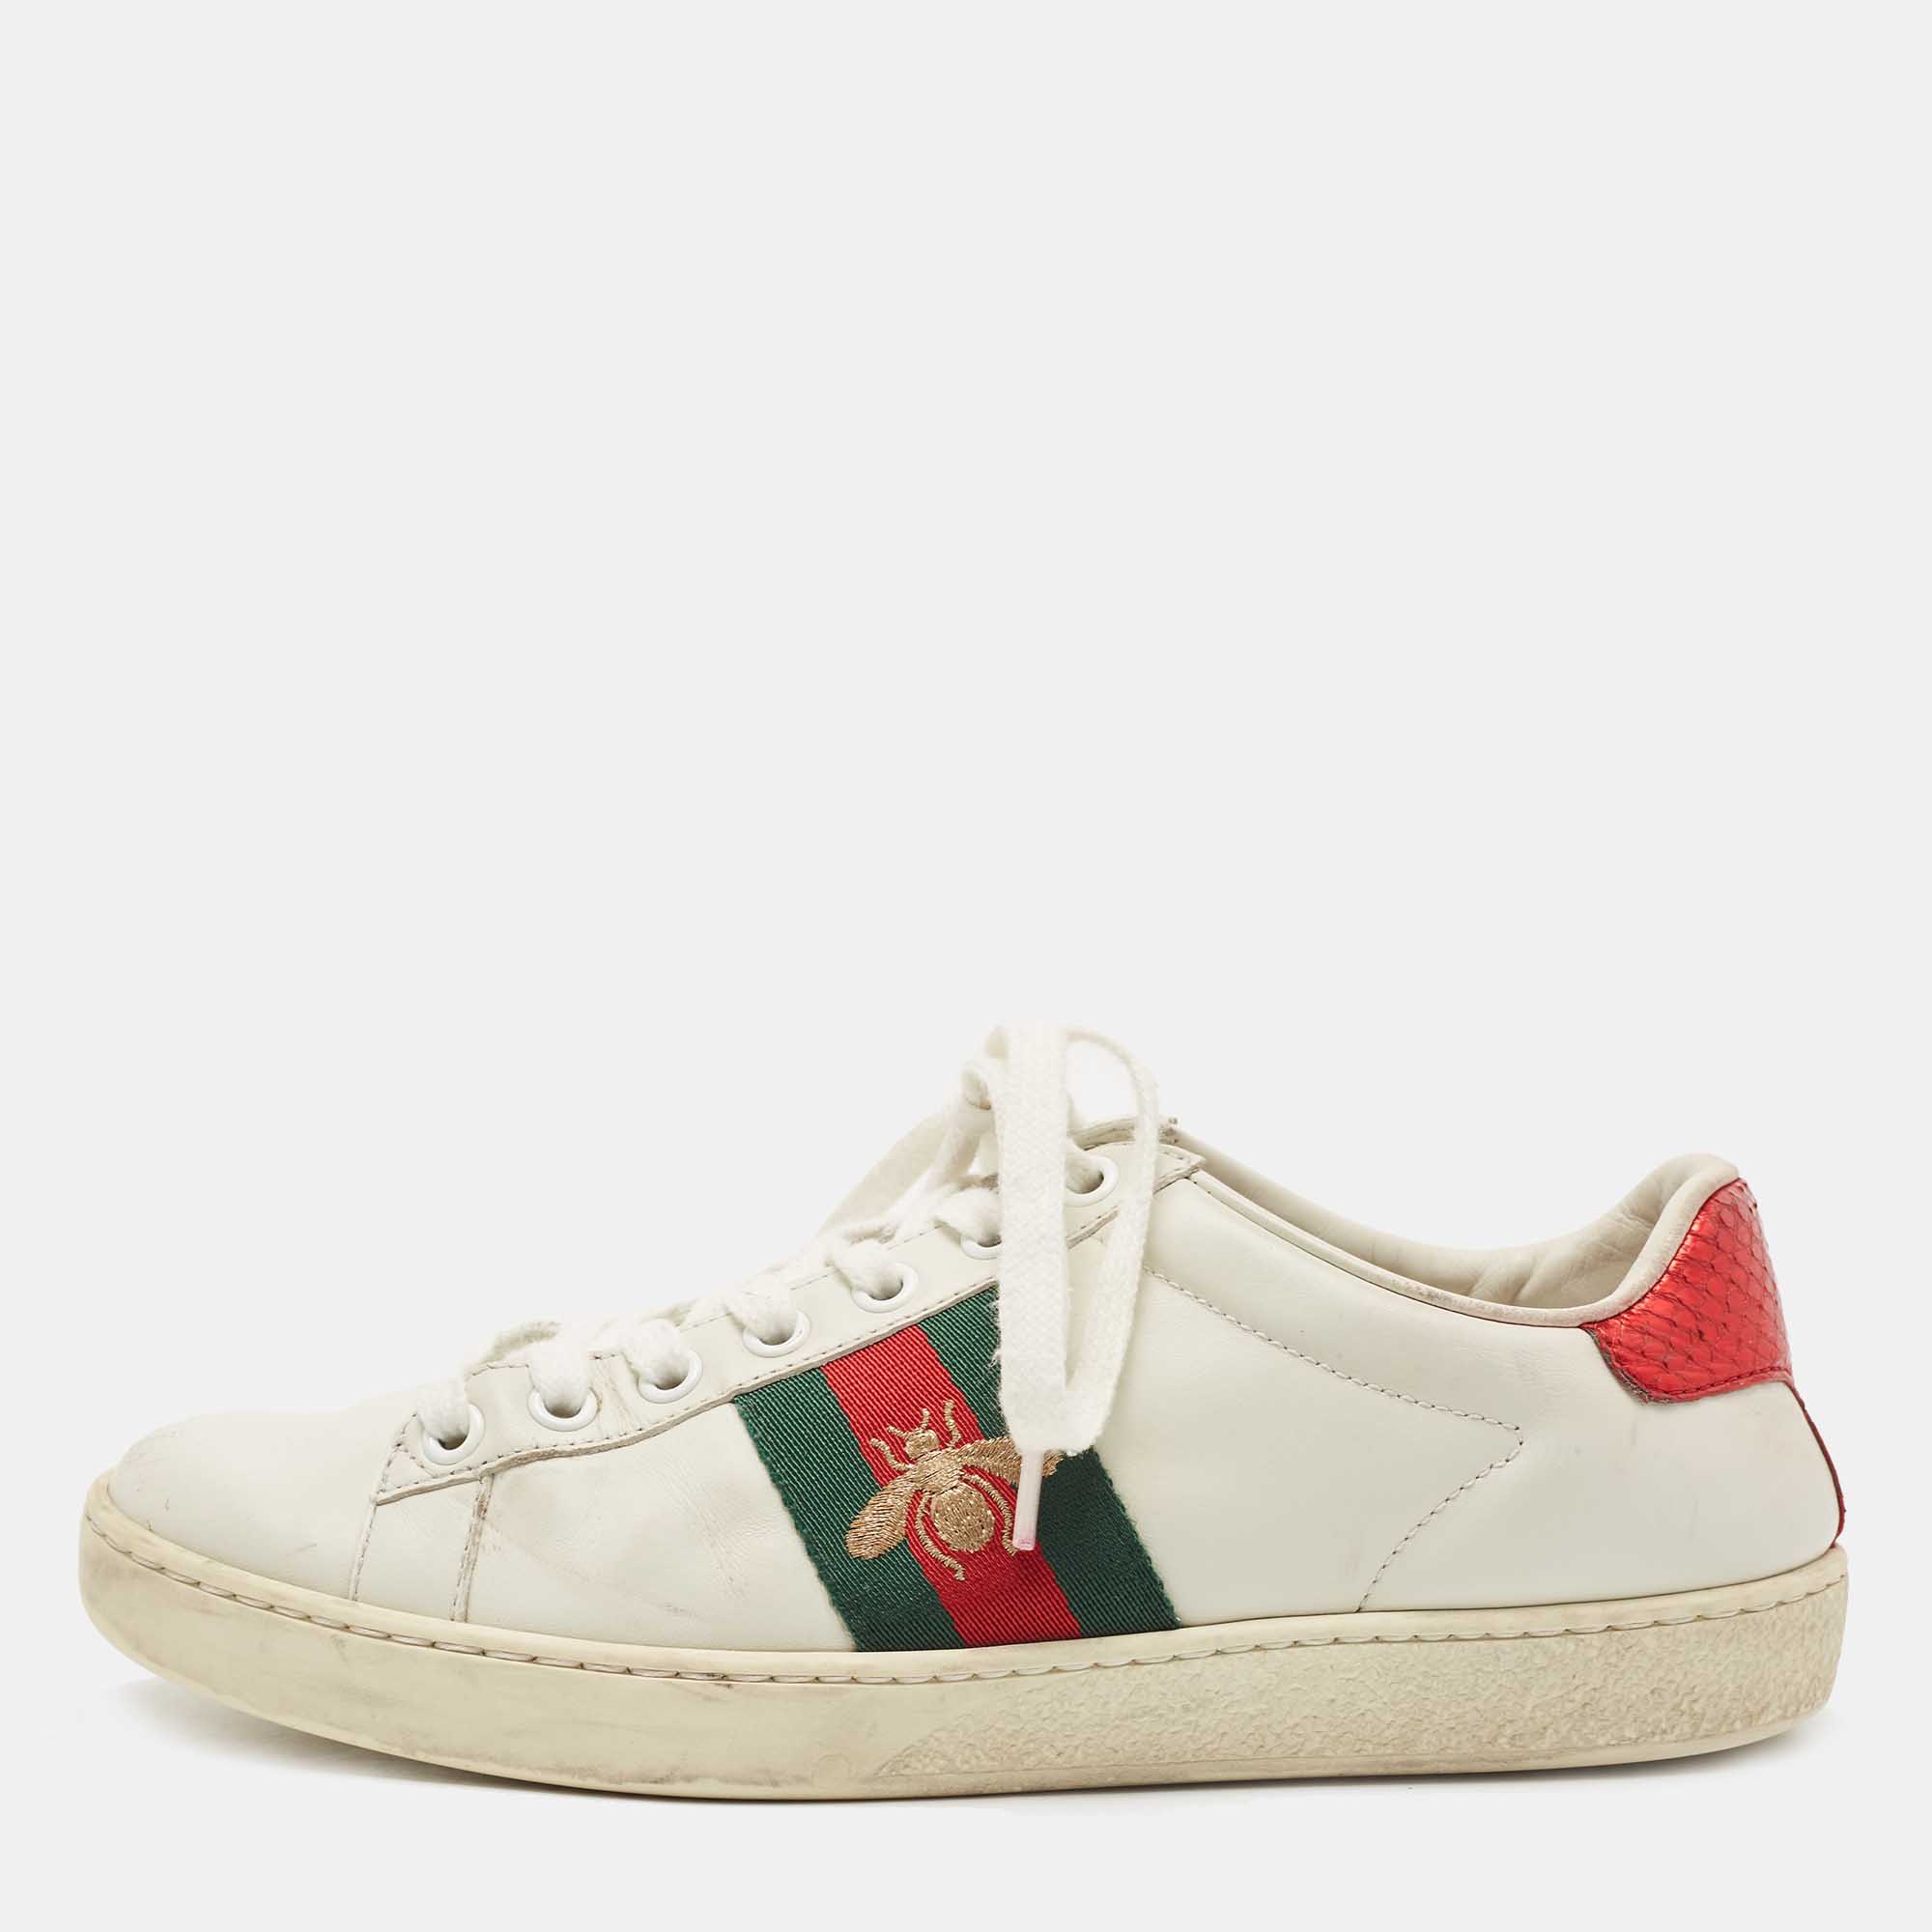 Pre-owned Gucci White Leather Bee Embroidered Ace Trainers Size 35.5